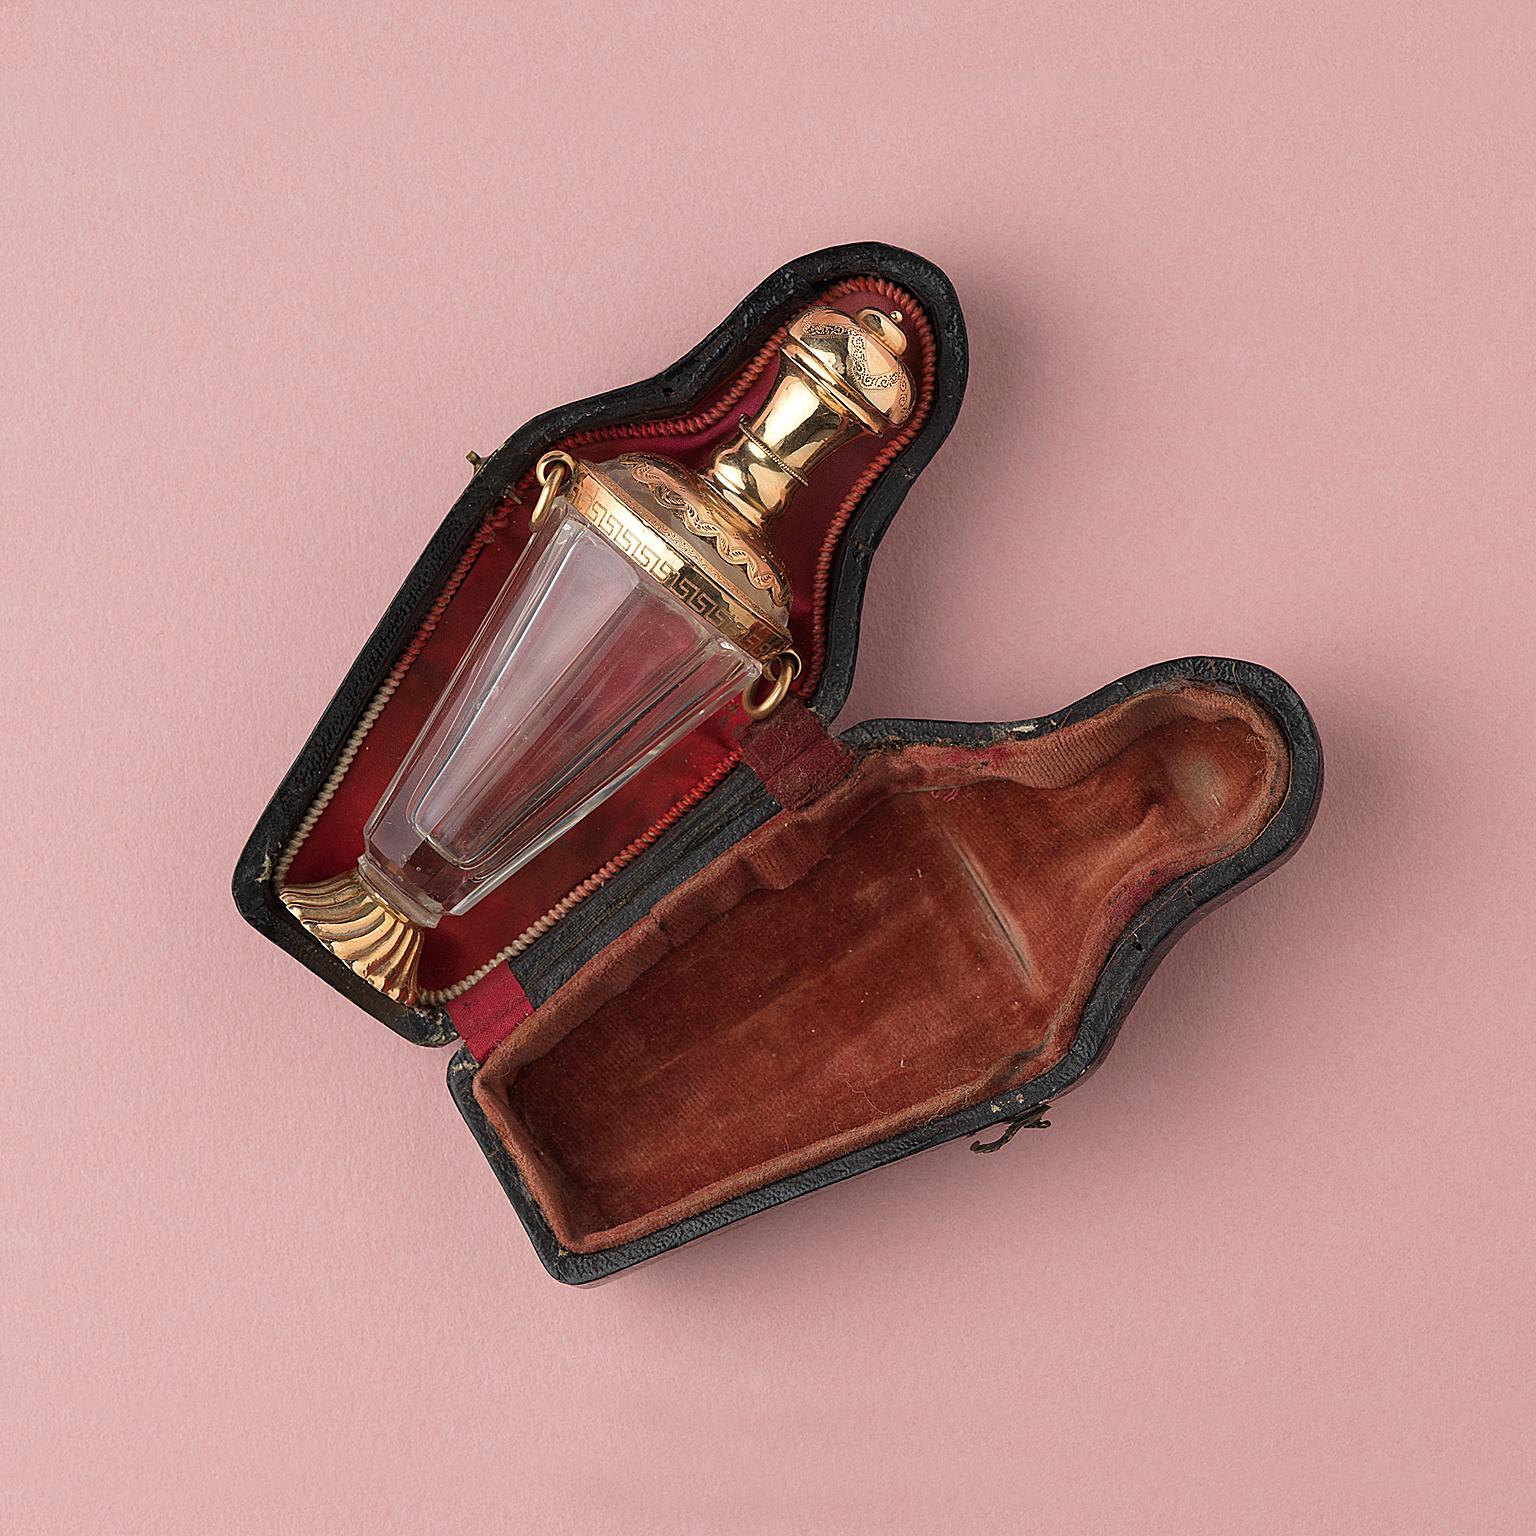 A glass scent bottle in the shape of an amphora with a 14 carat gold mounting, foot and stopper and two rings at the side in its original leather case, Netherlands, 19th century.

weight: 60.38 grams
dimensions: 11 x 4.5 cm